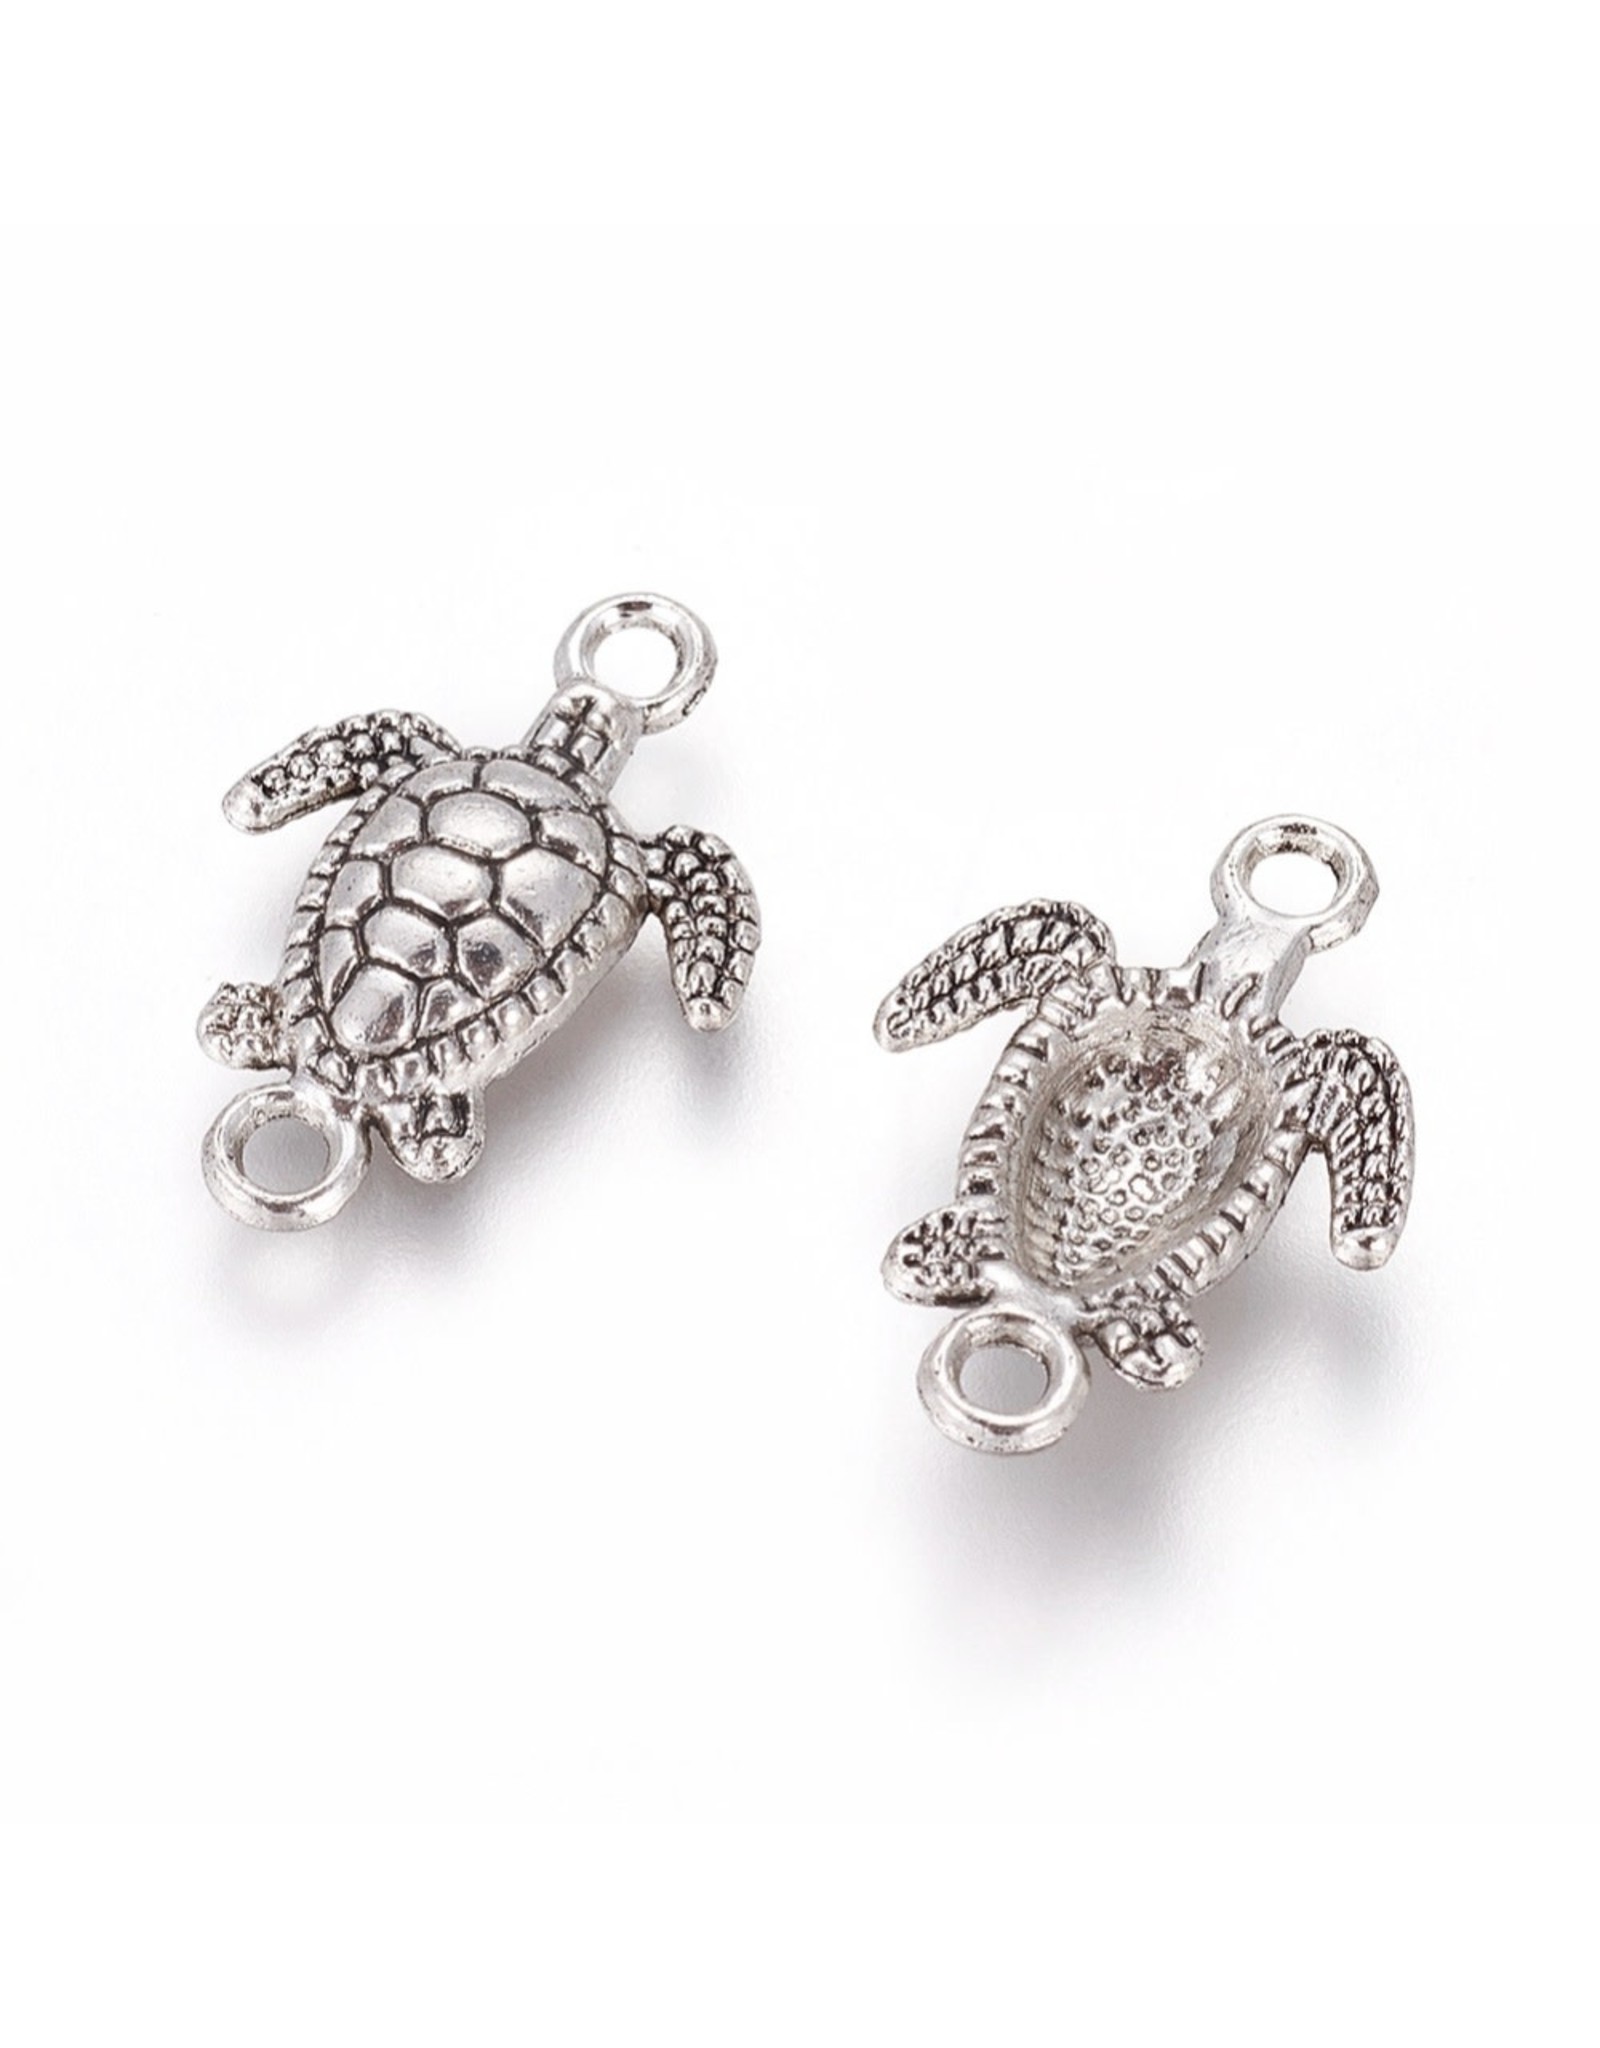 Turtle  Link  21x15mm  Antique Silver x5  NF